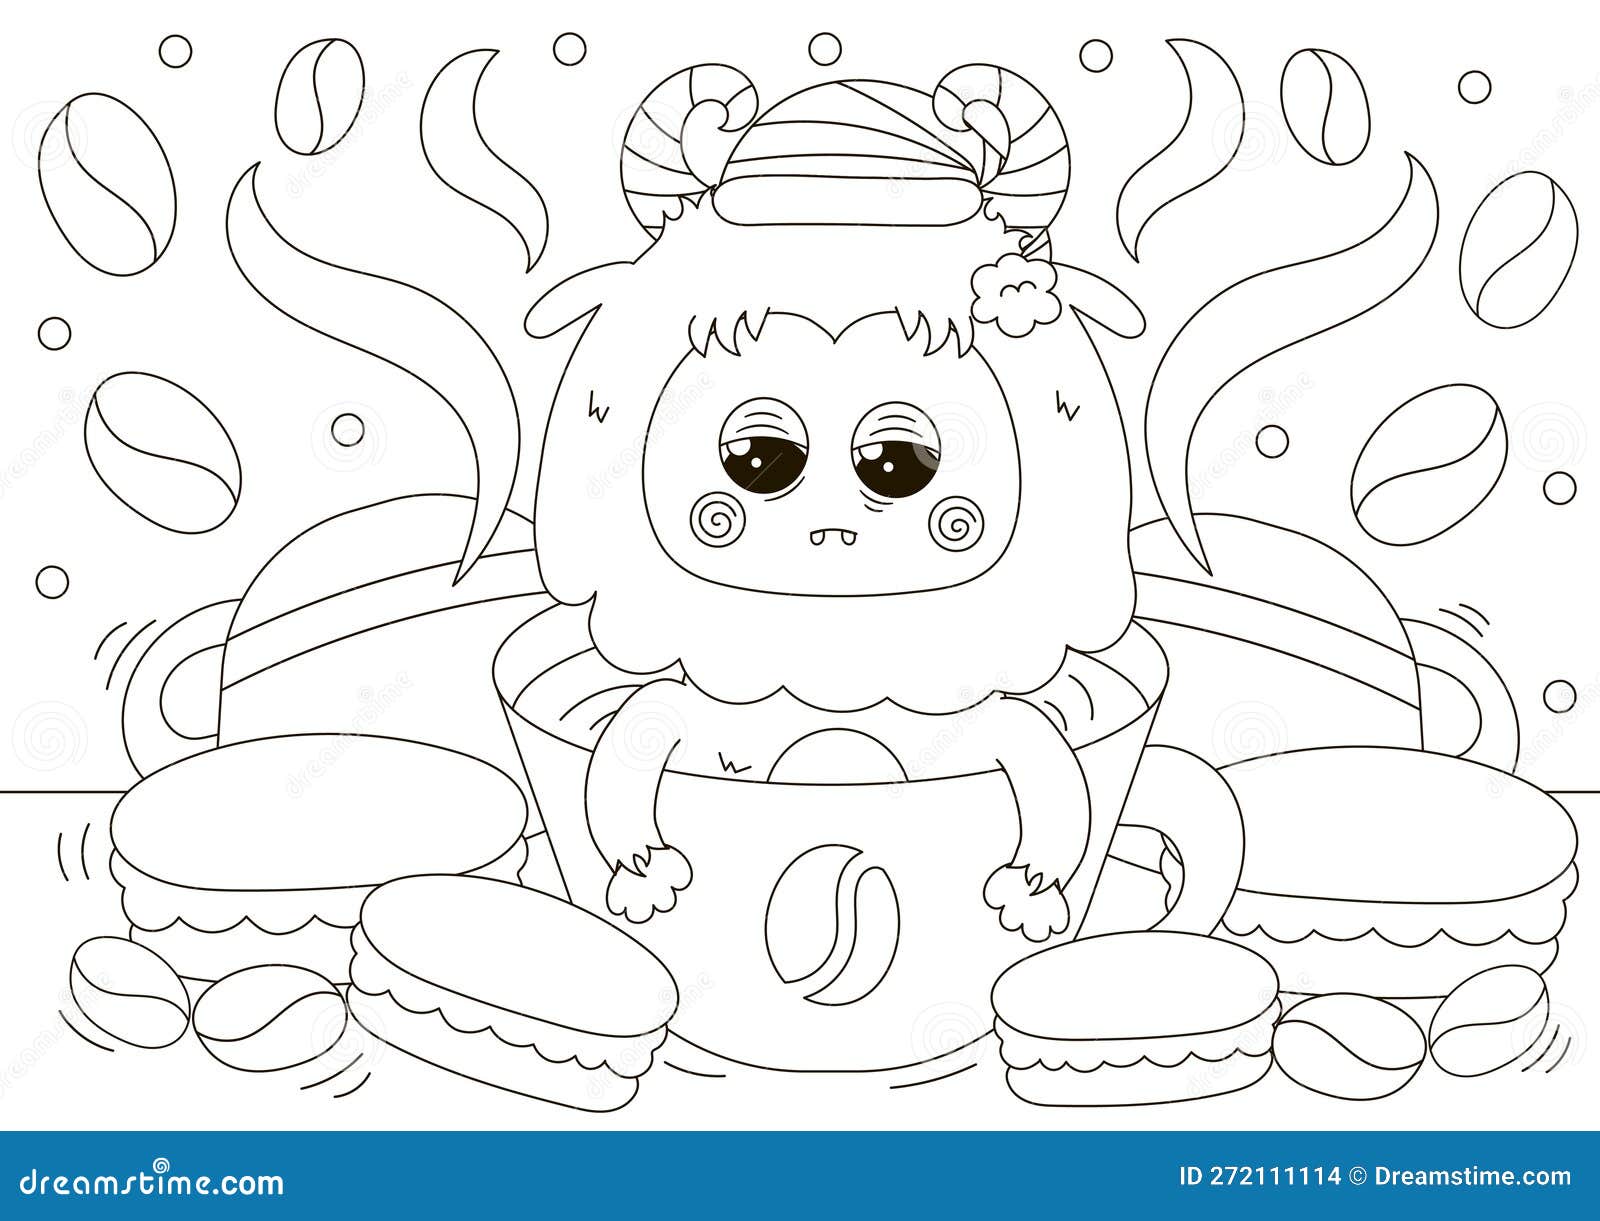 Funny coloring page with cute yeti character in cup of coffee with macaroons around stock vector